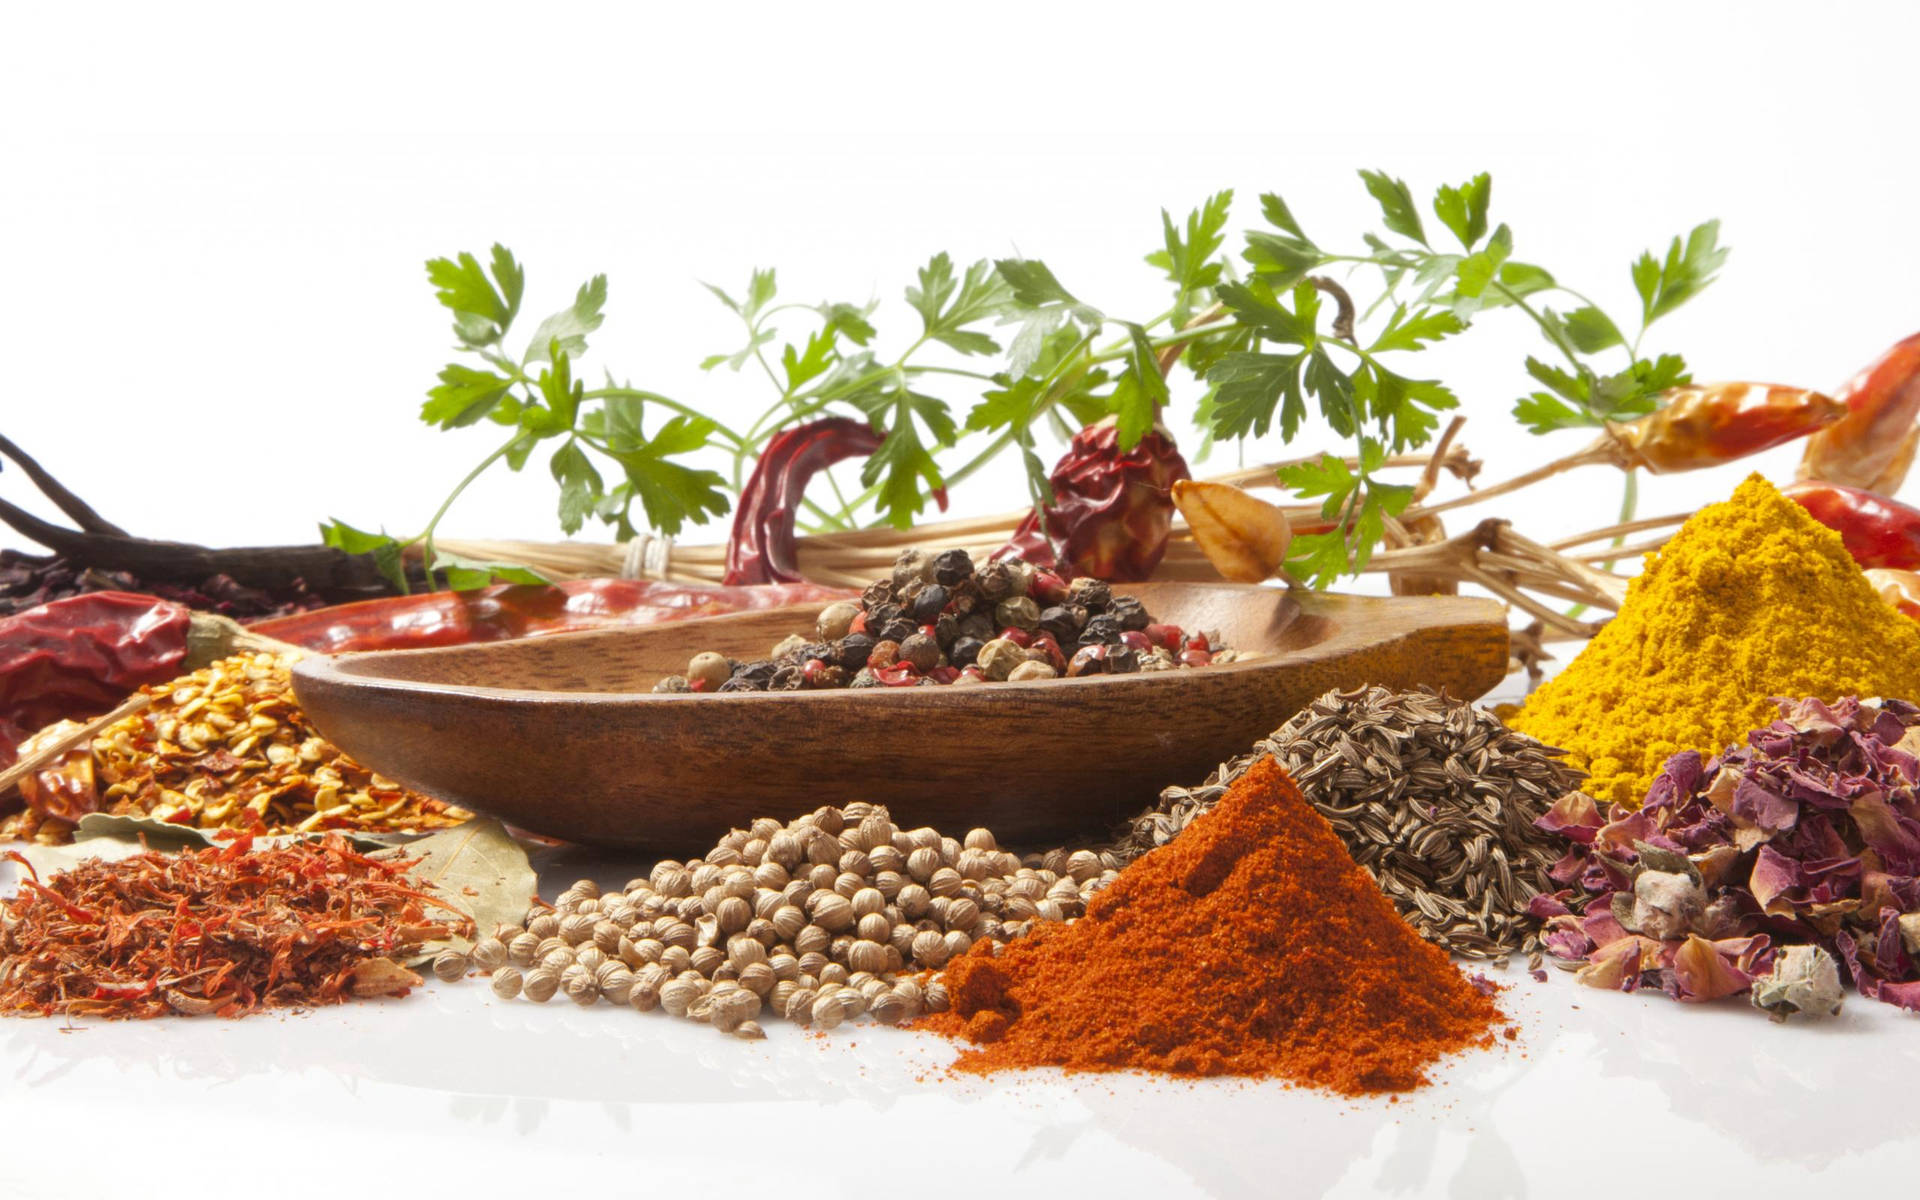 Assortment of Ground and Whole Spices on Minimalist Background Wallpaper